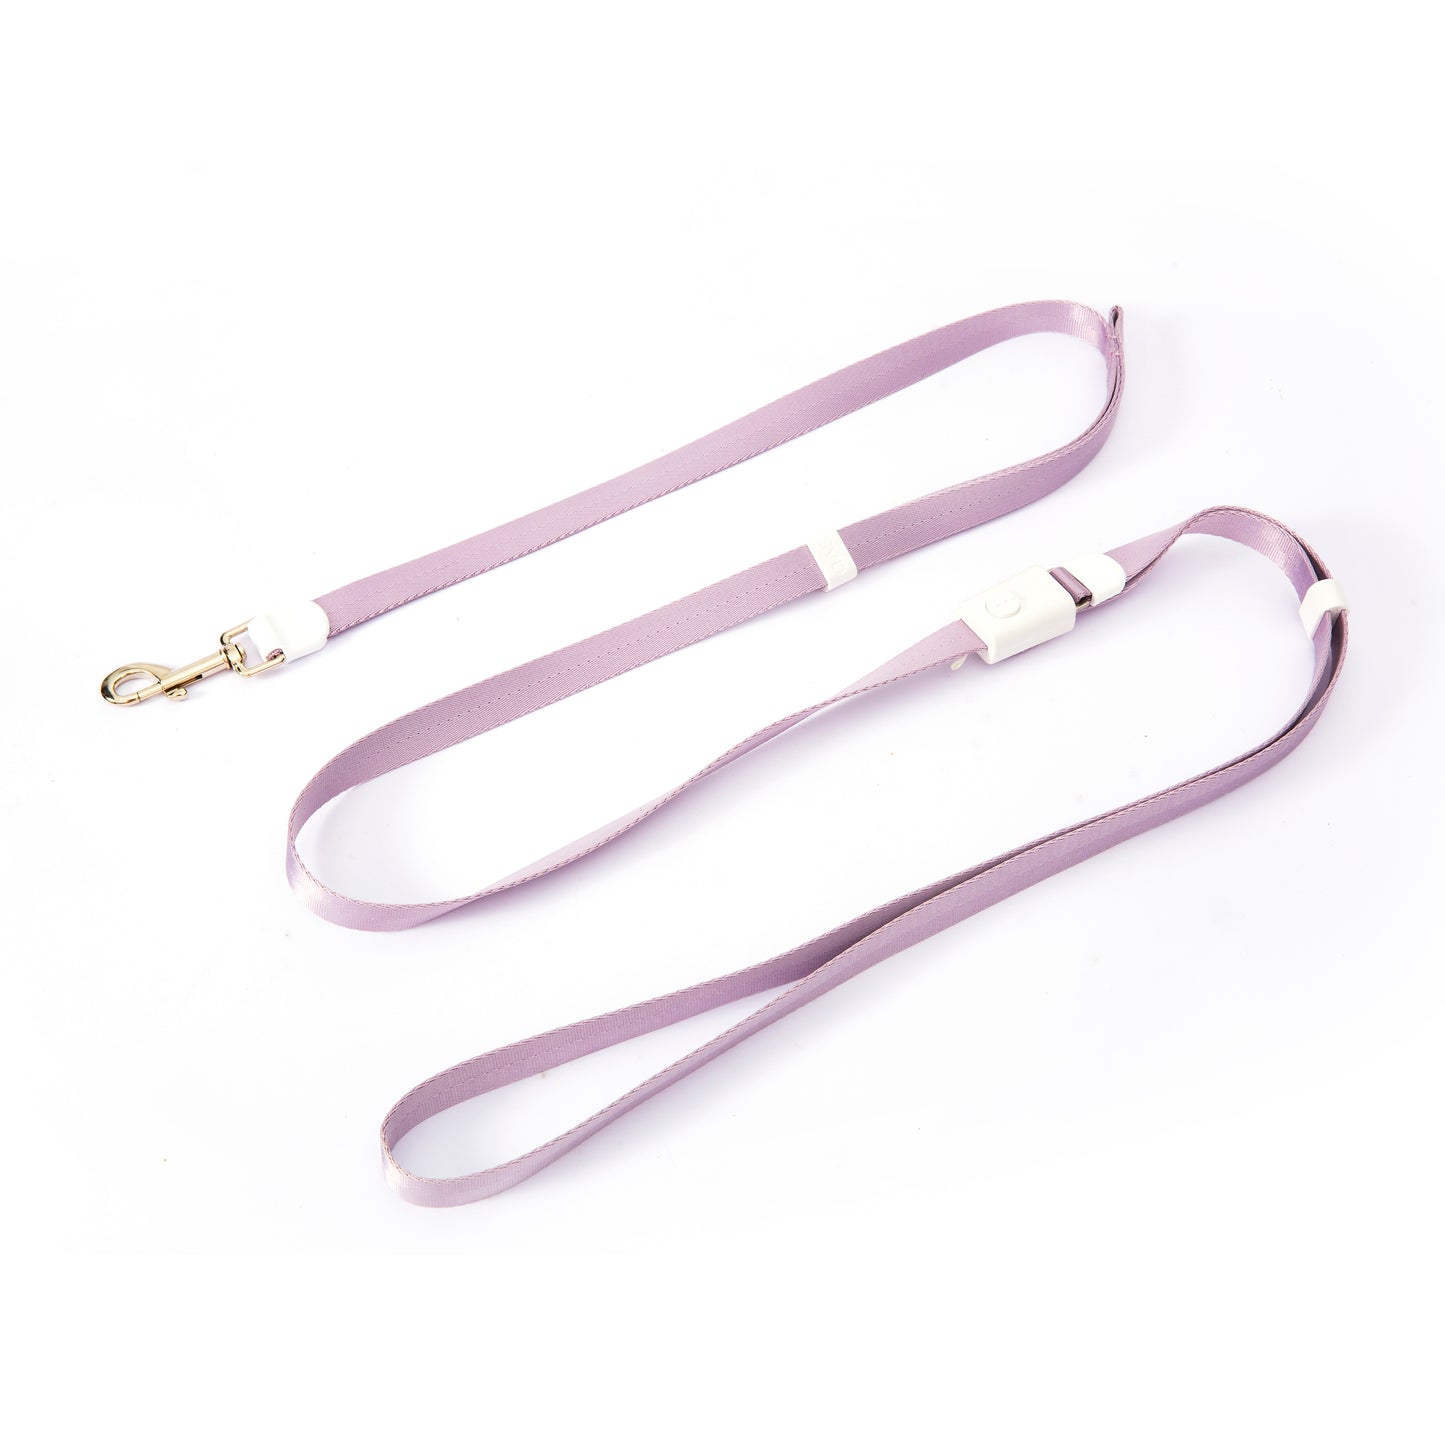 4-in-1 Hands-free Dog Leash